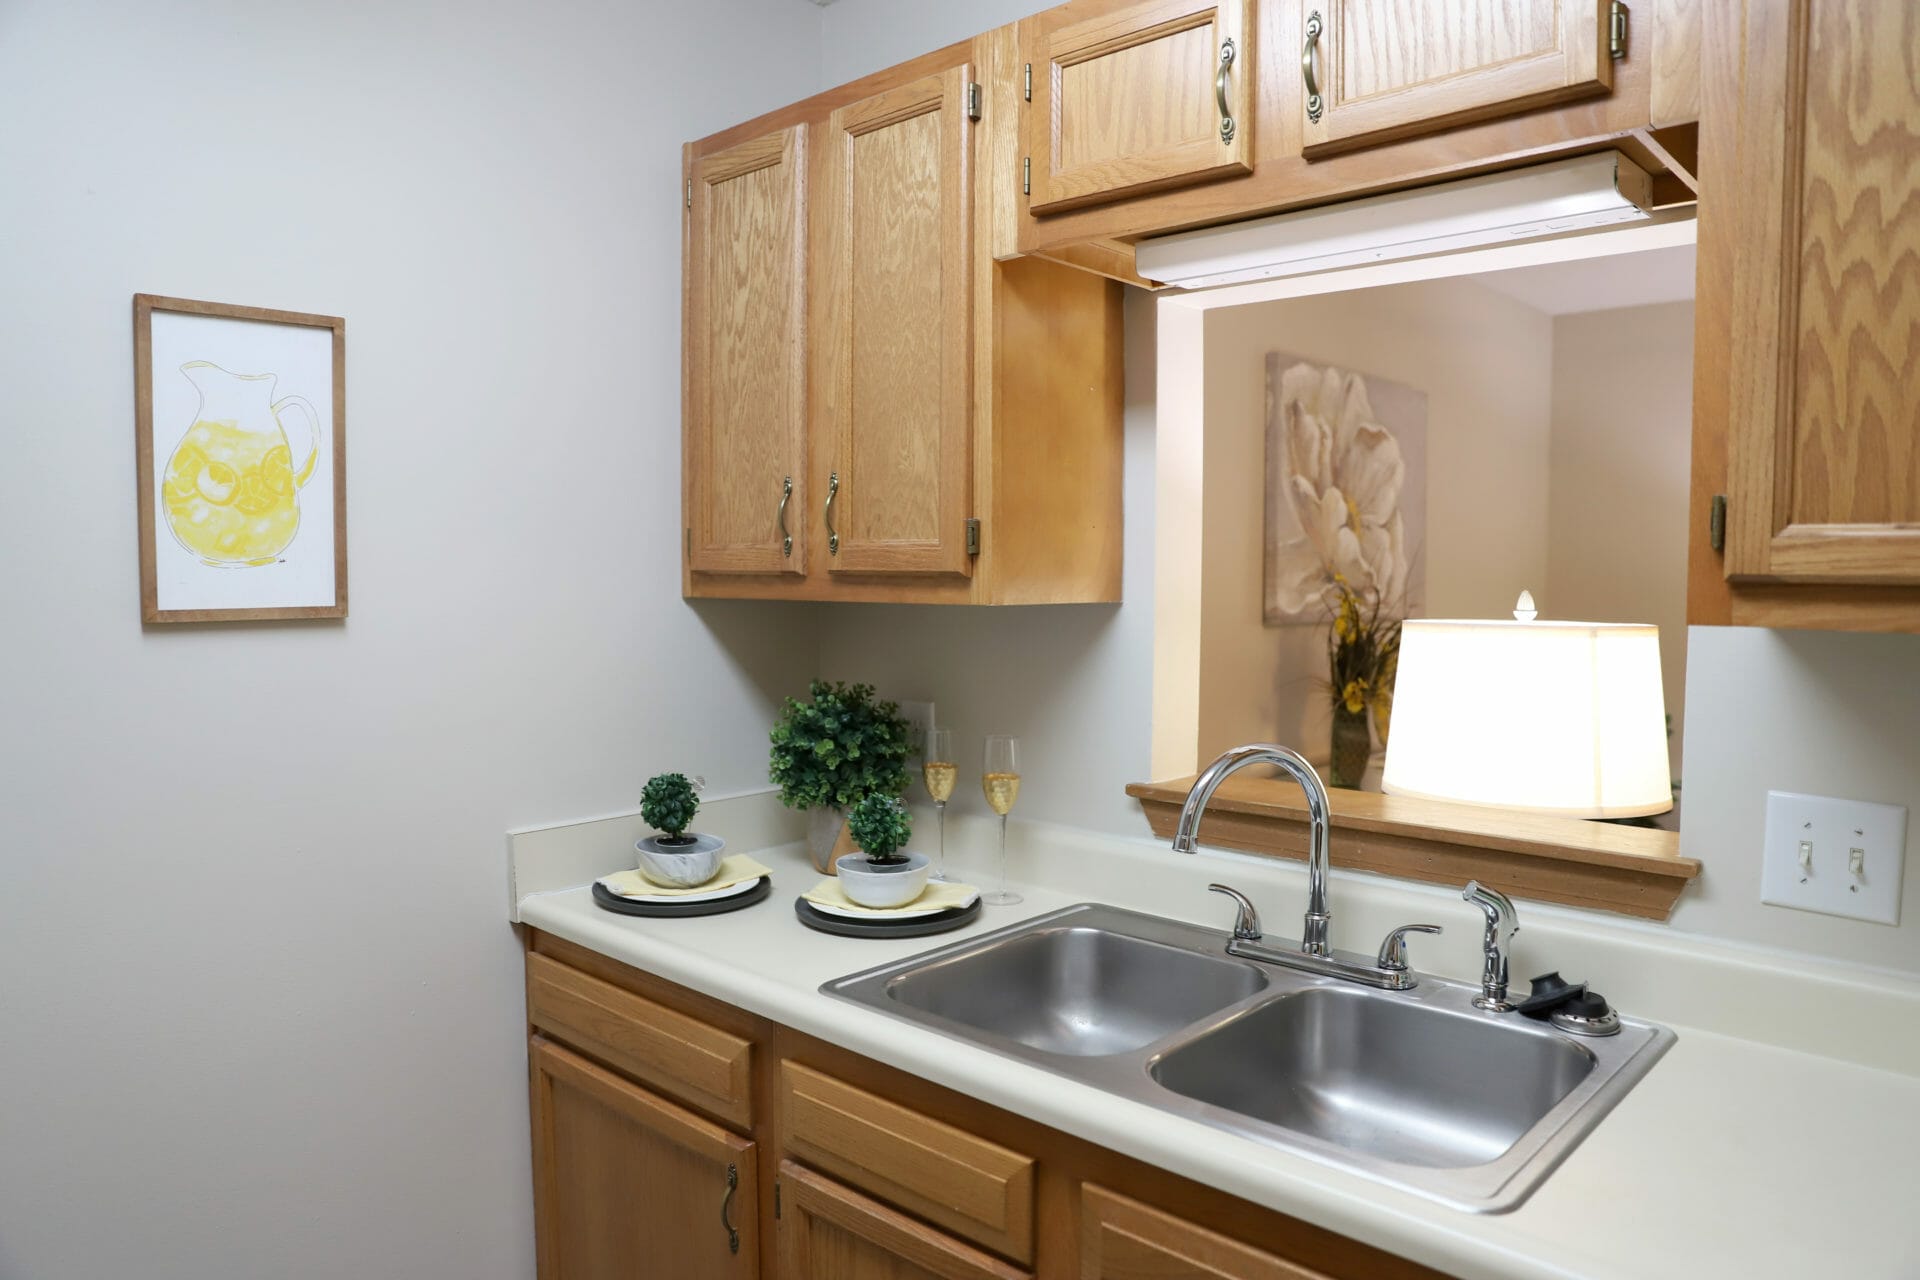 <span  class="uc_style_uc_tiles_grid_image_elementor_uc_items_attribute_title" style="color:#000000;">Sink in the kitchen at Rosegate Garden Homes. </span>